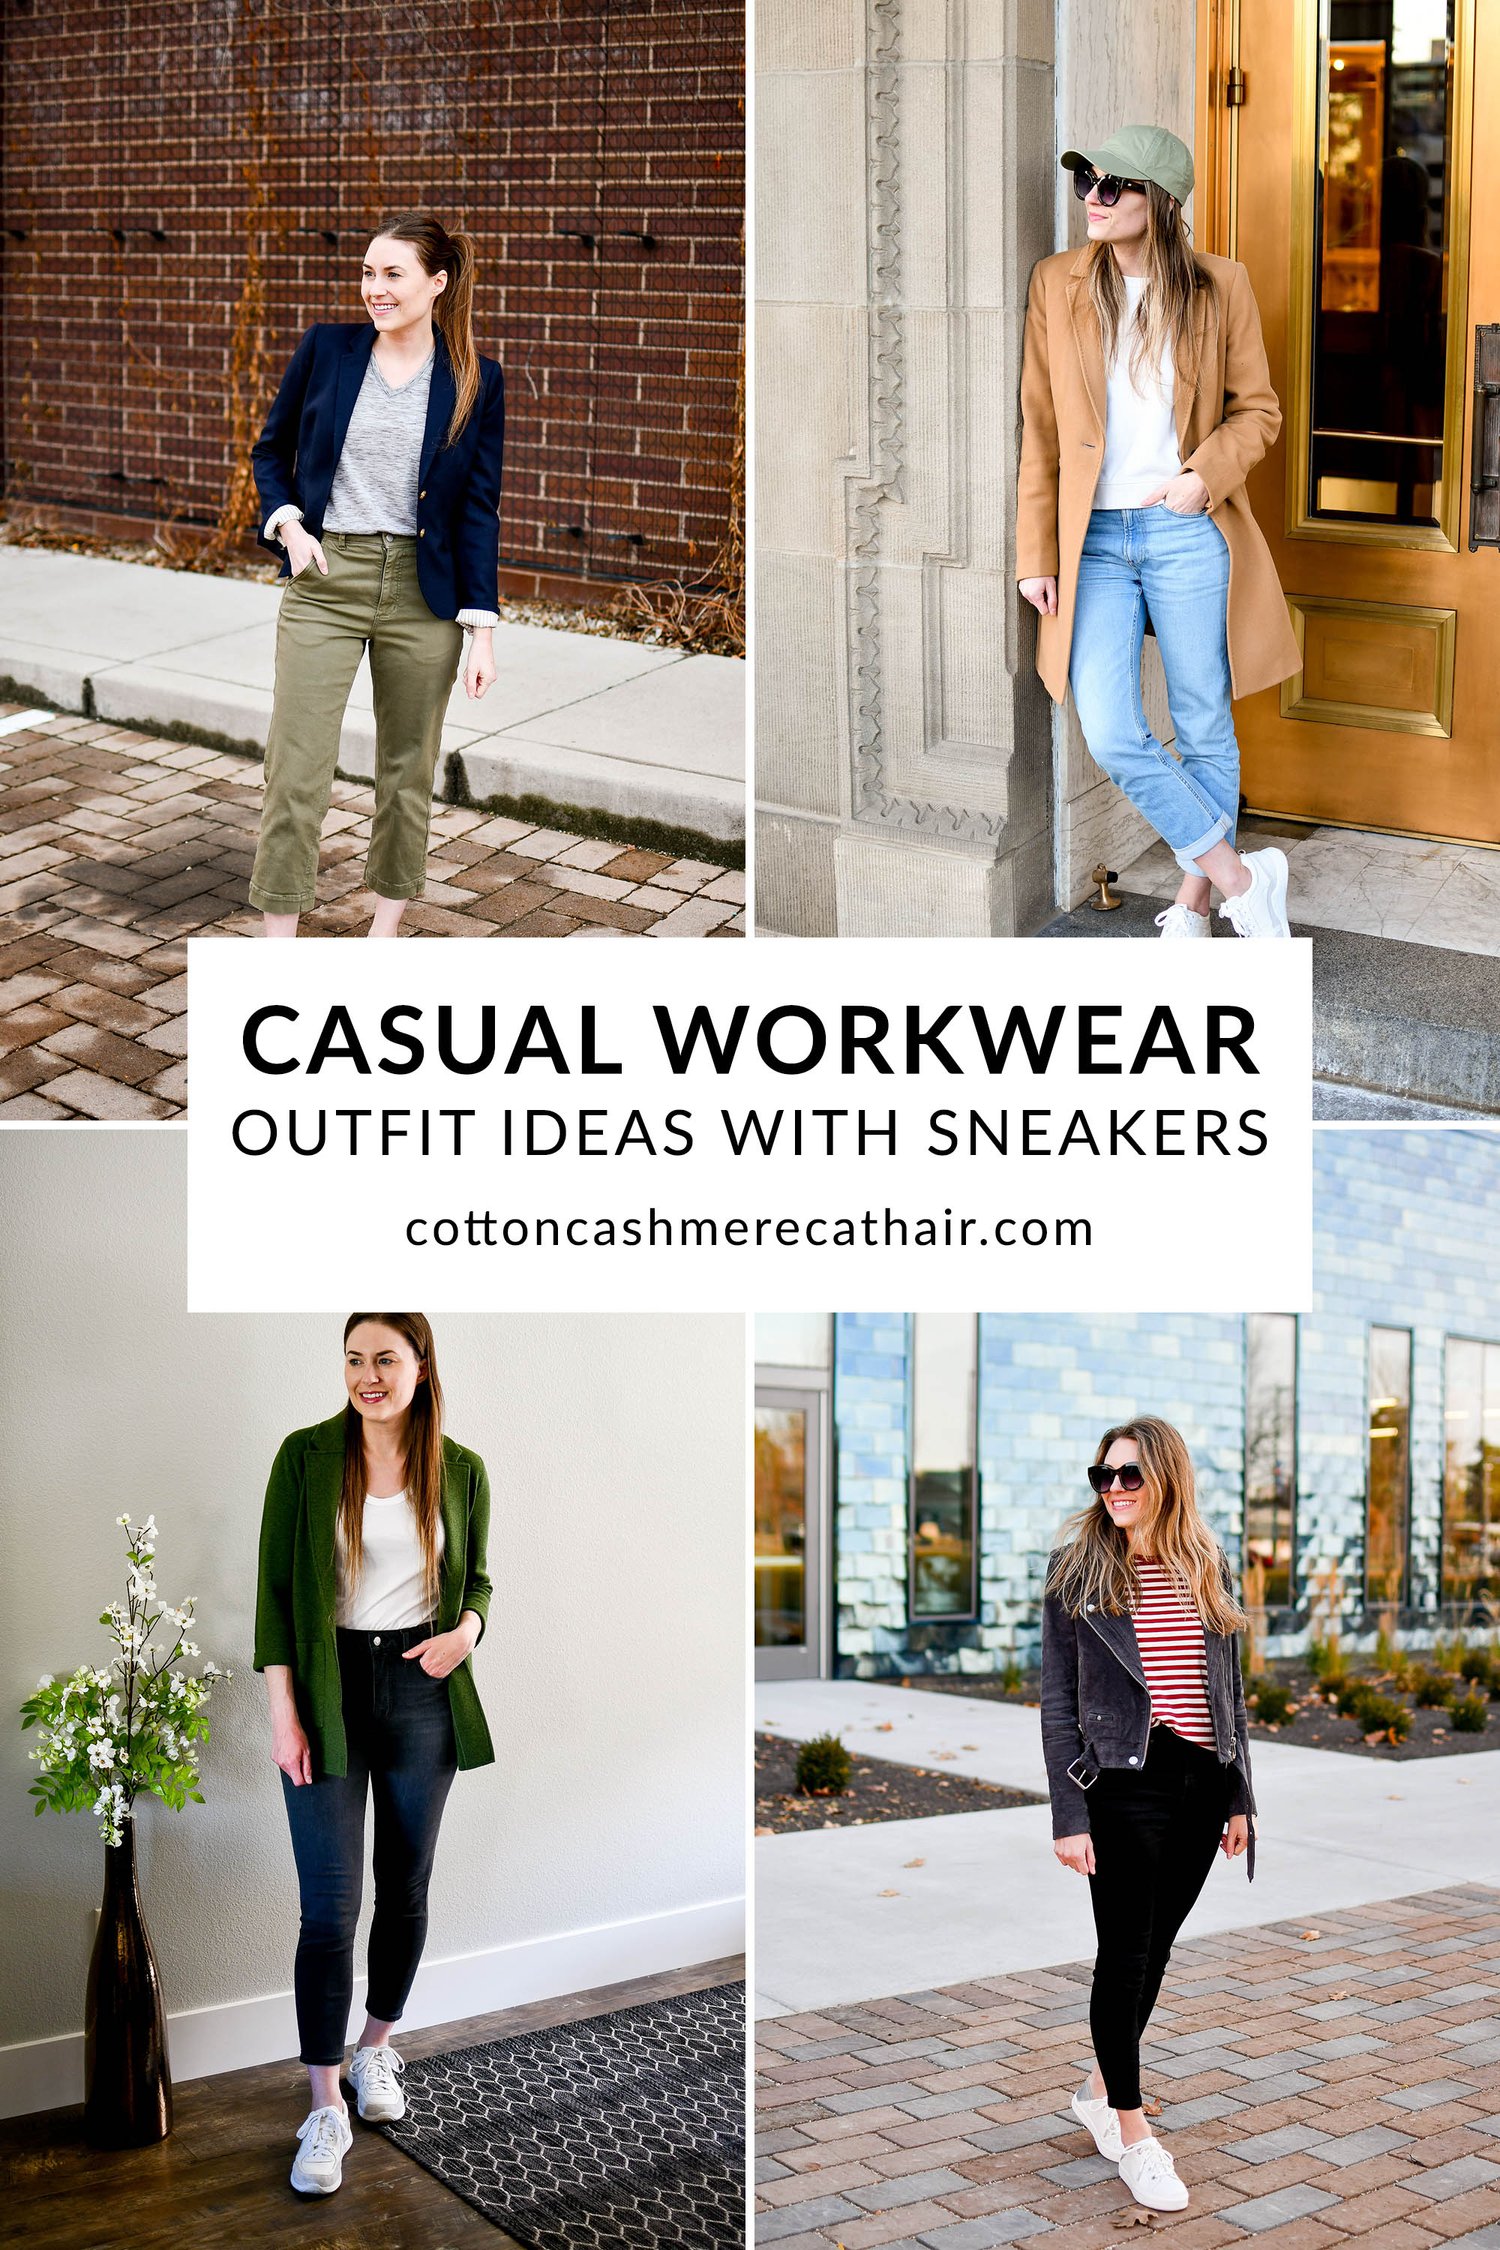 Dress Pants with Low Top Sneakers Dressy Spring Outfits For Women (2 ideas  & outfits)